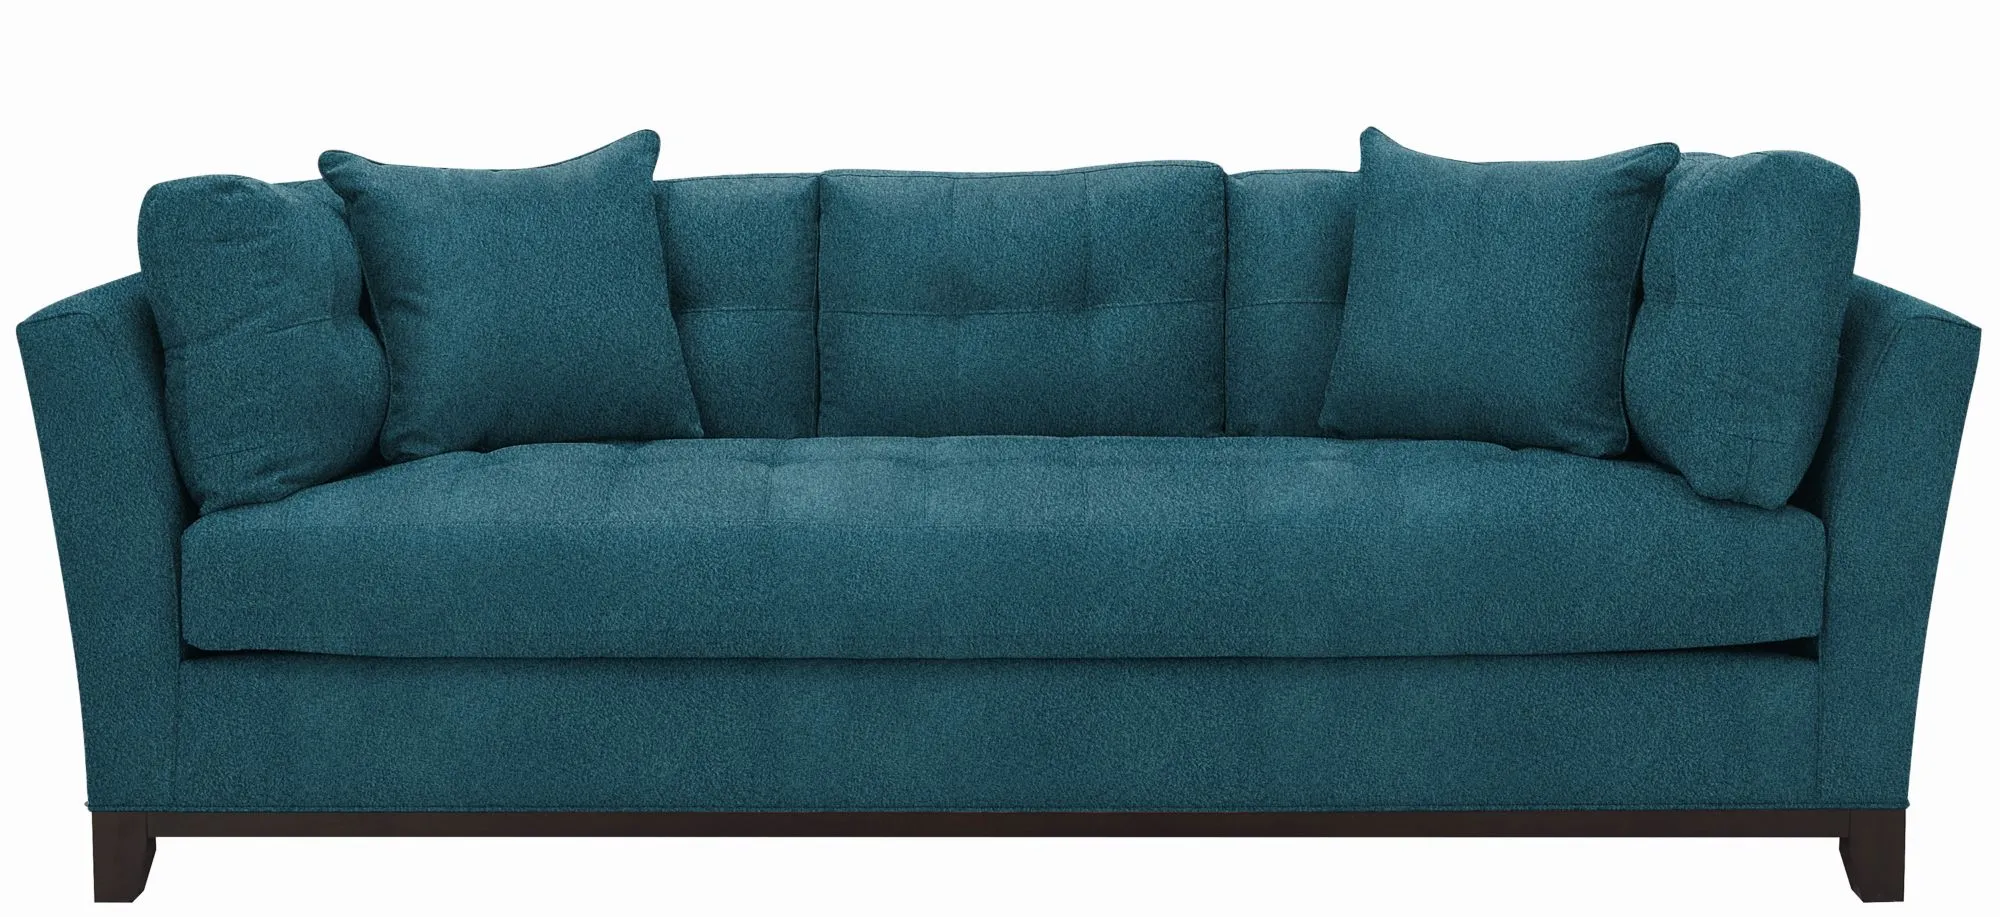 Cityscape Sofa in Suede So Soft Lagoon by H.M. Richards